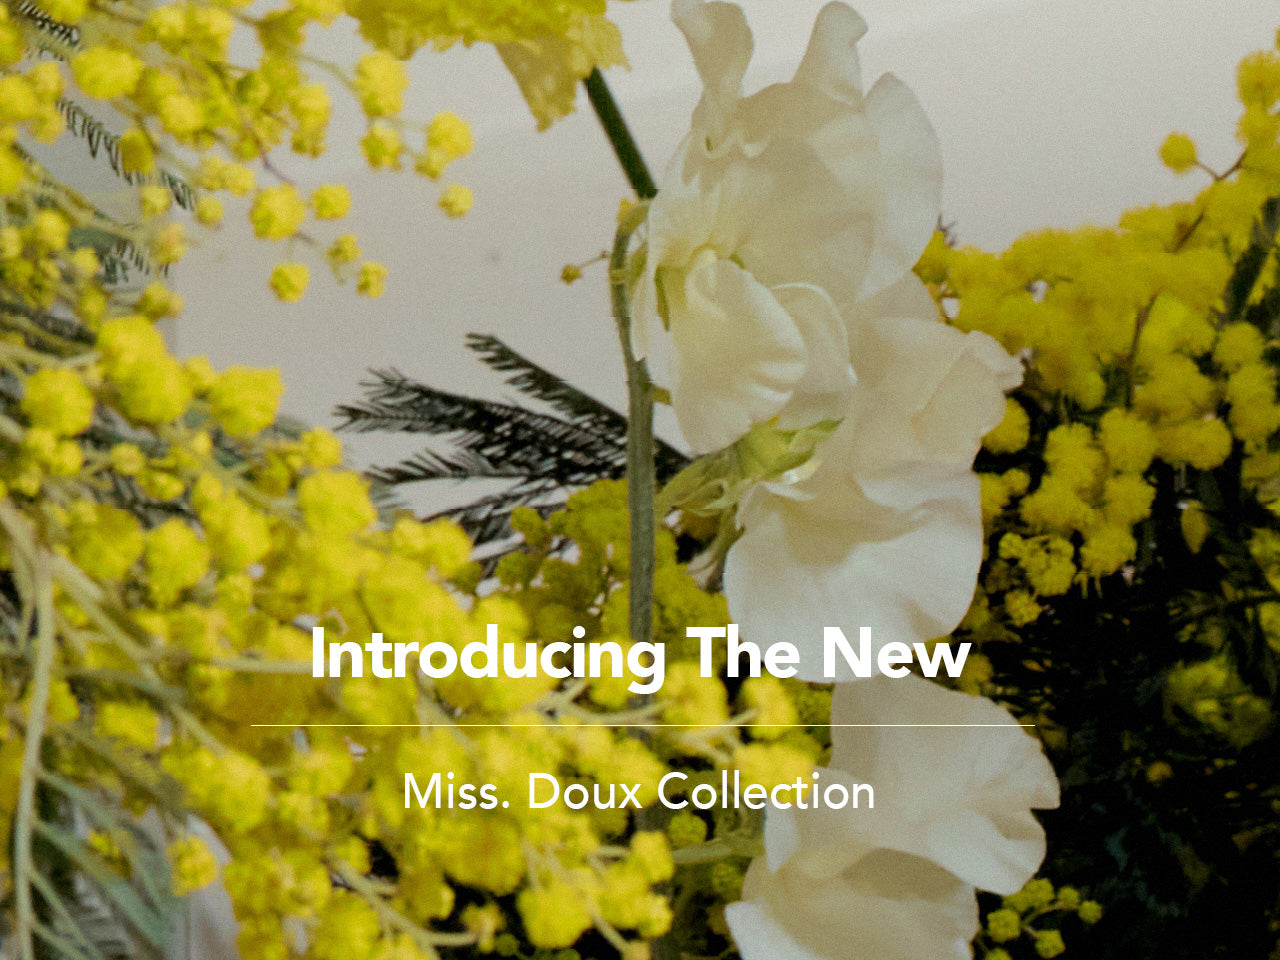 Introducing The New Miss. Doux Collection